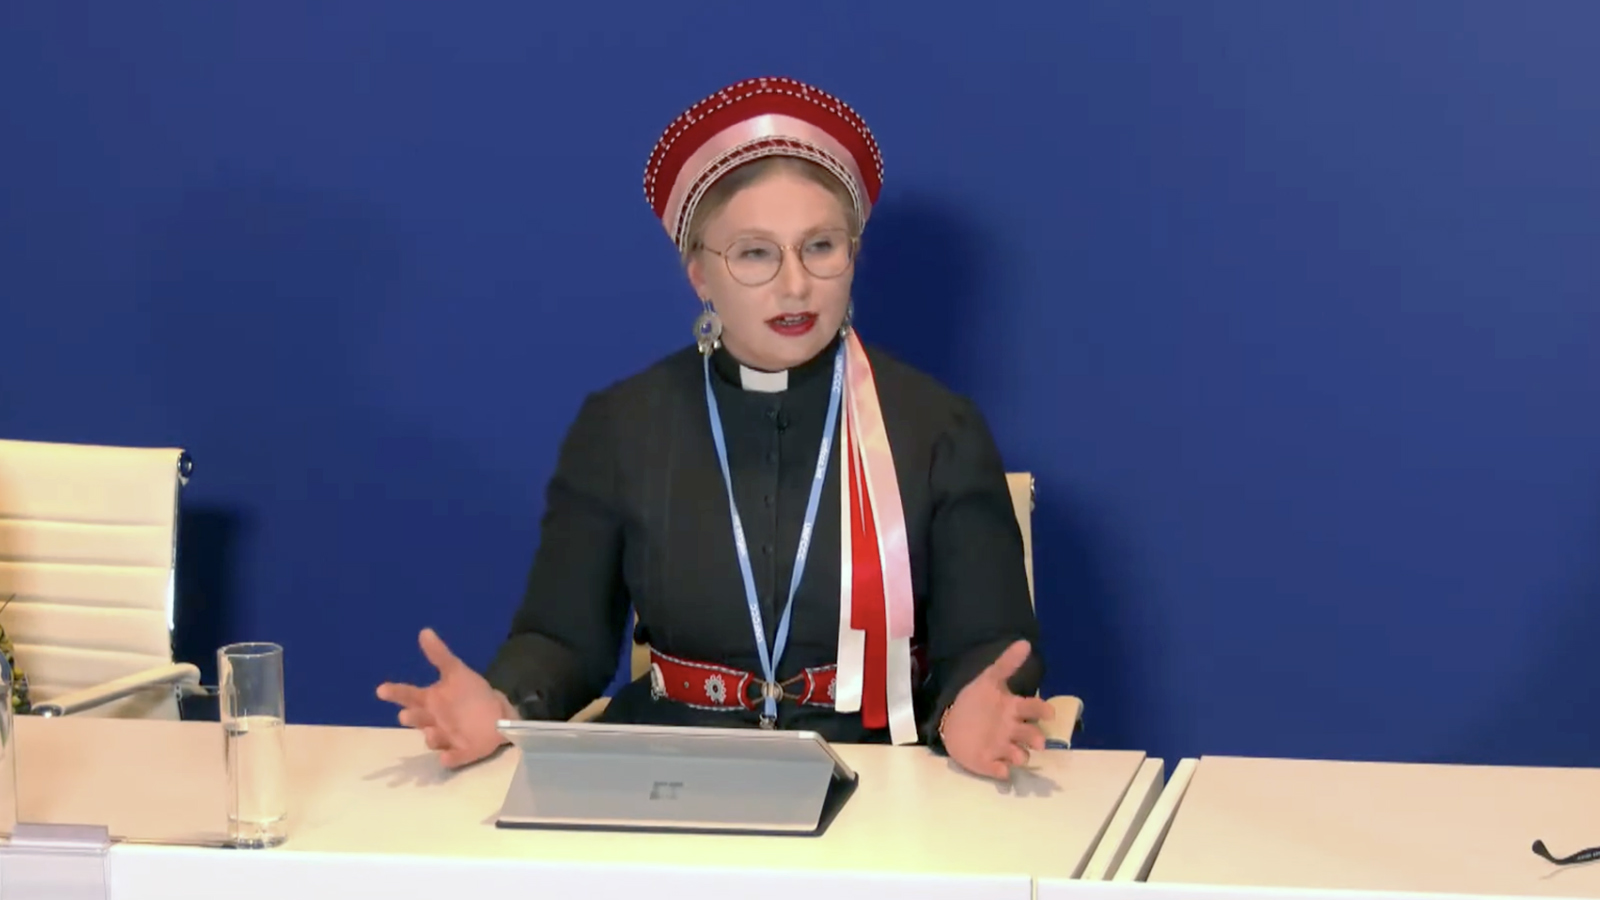 The Rev. Mari Valjakka, pastor of Sámi at the Evangelical Lutheran Church of Finland, and moderator of the Indigenous Peoples Reference Group of the World Council of Churches. Video screengrab